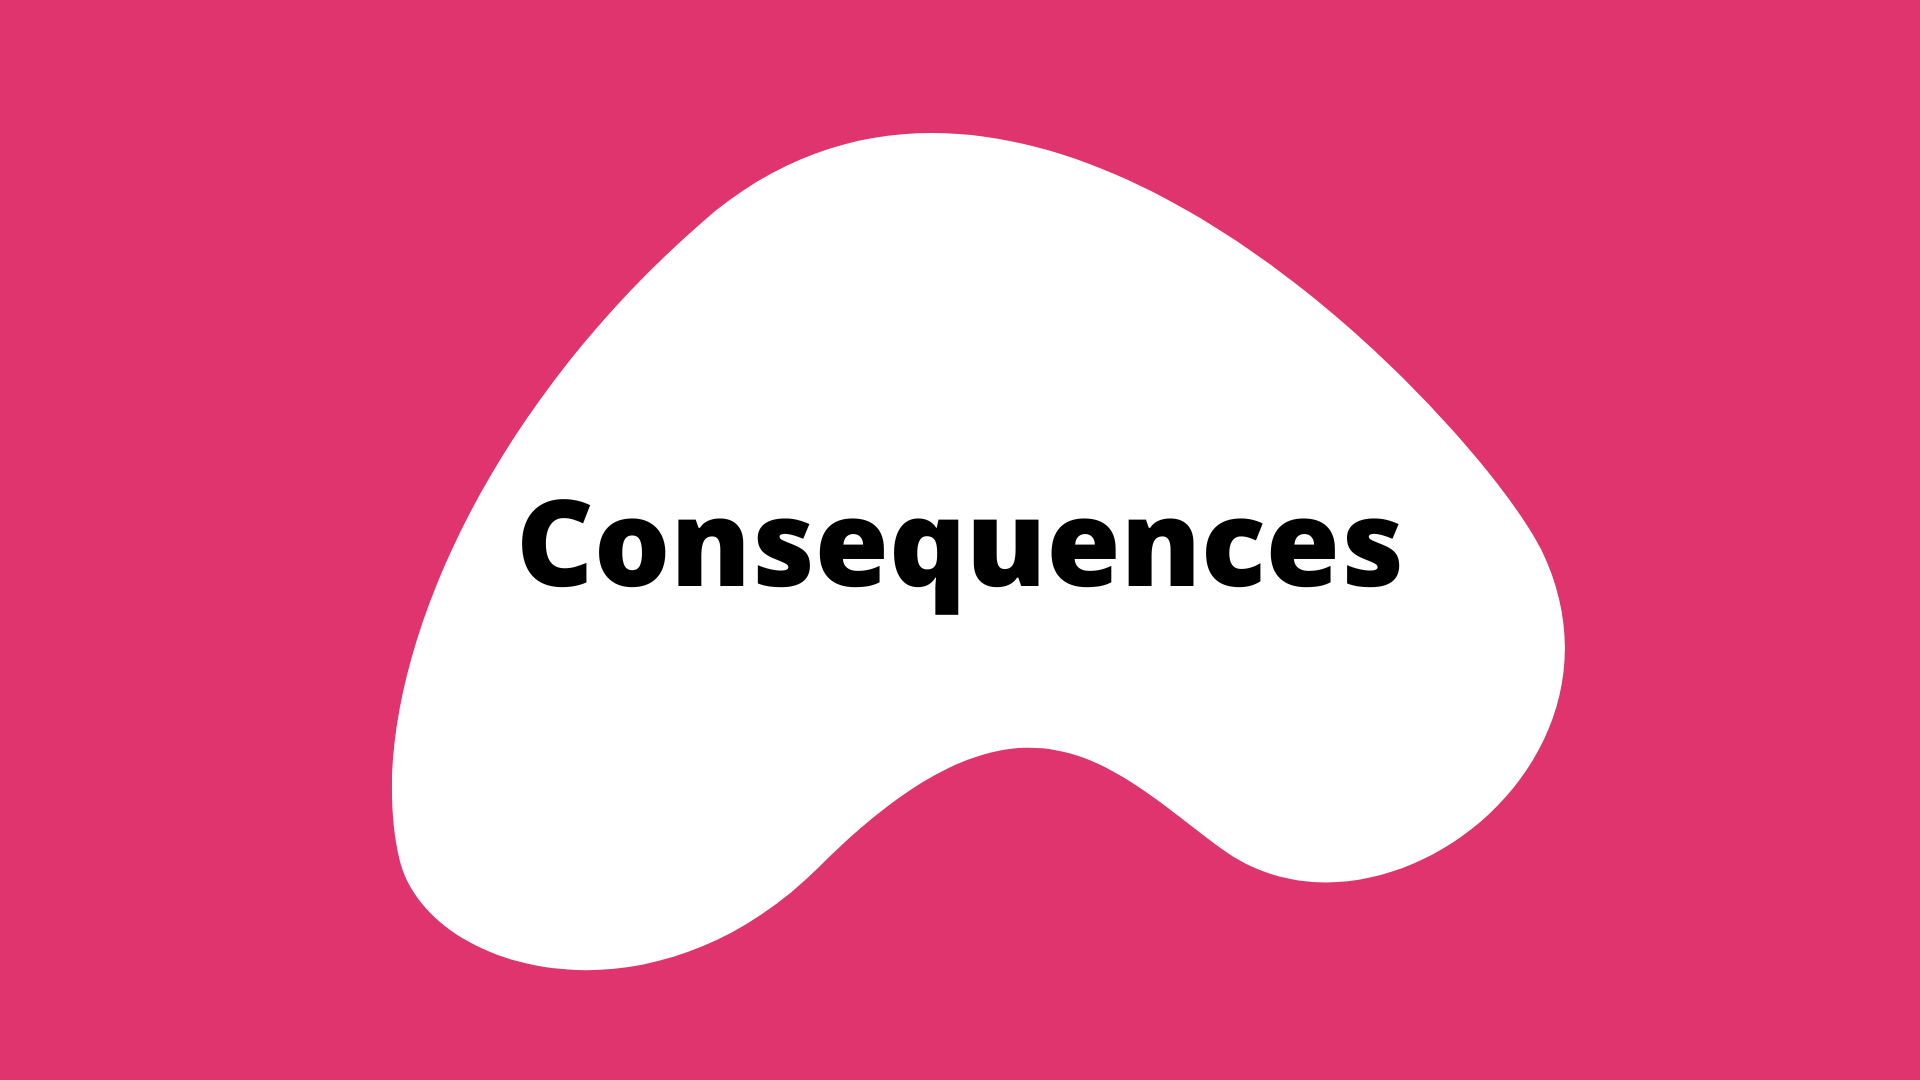 Consequences